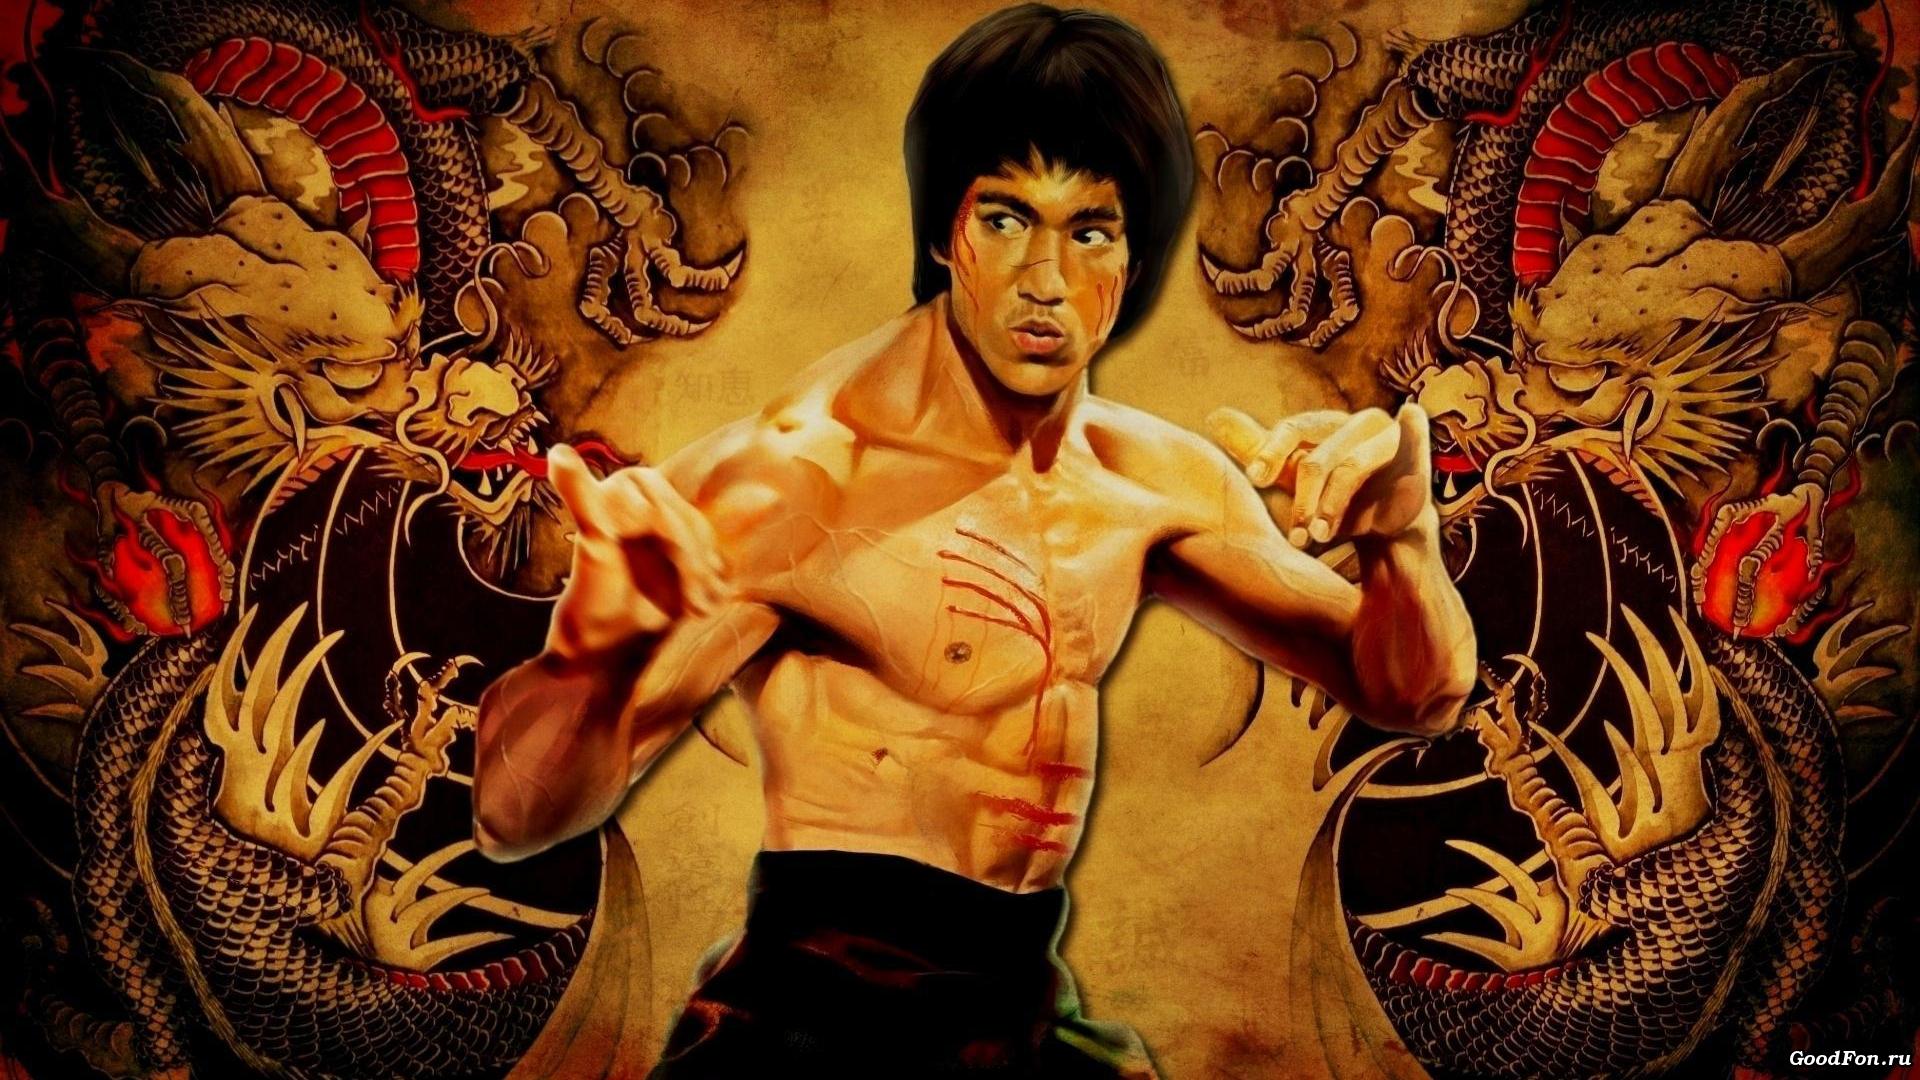 TGDB - Browse - Game - Bruce Lee